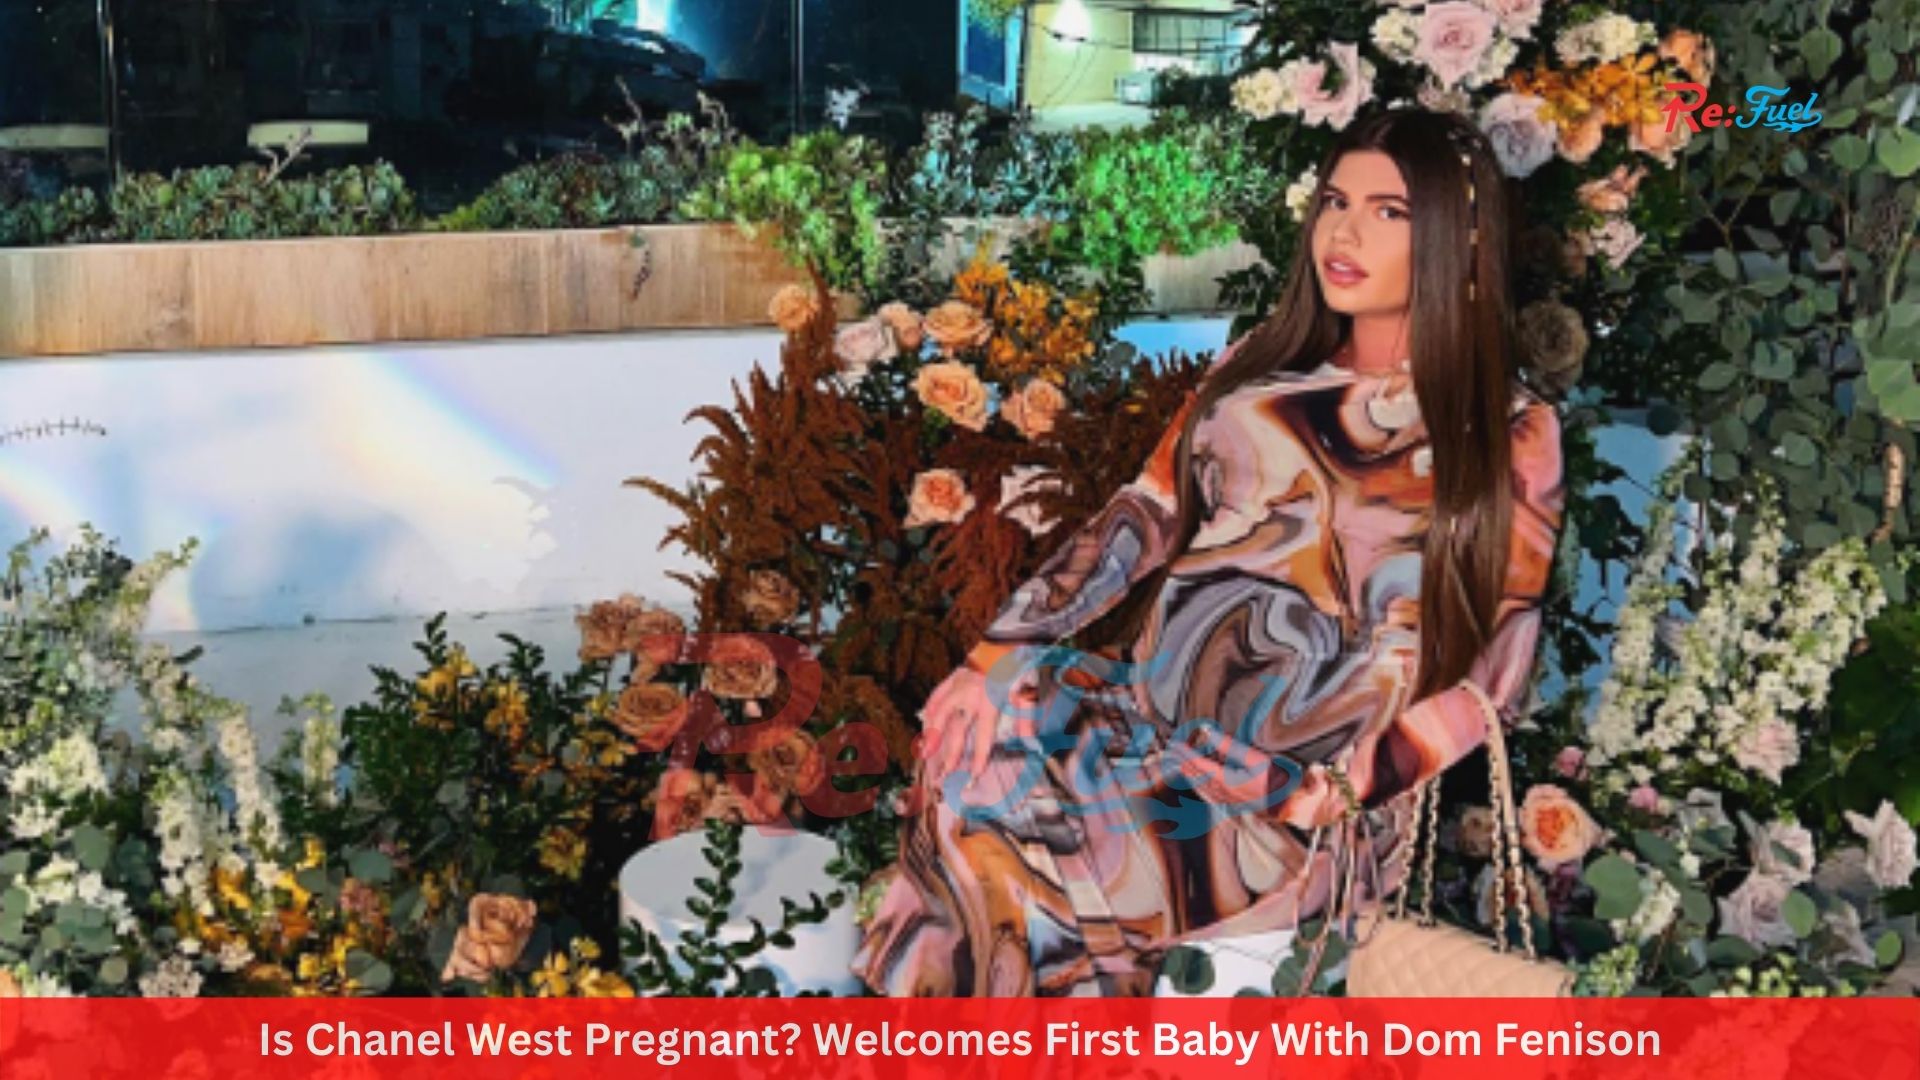 Is Chanel West Pregnant? Welcomes First Baby With Dom Fenison